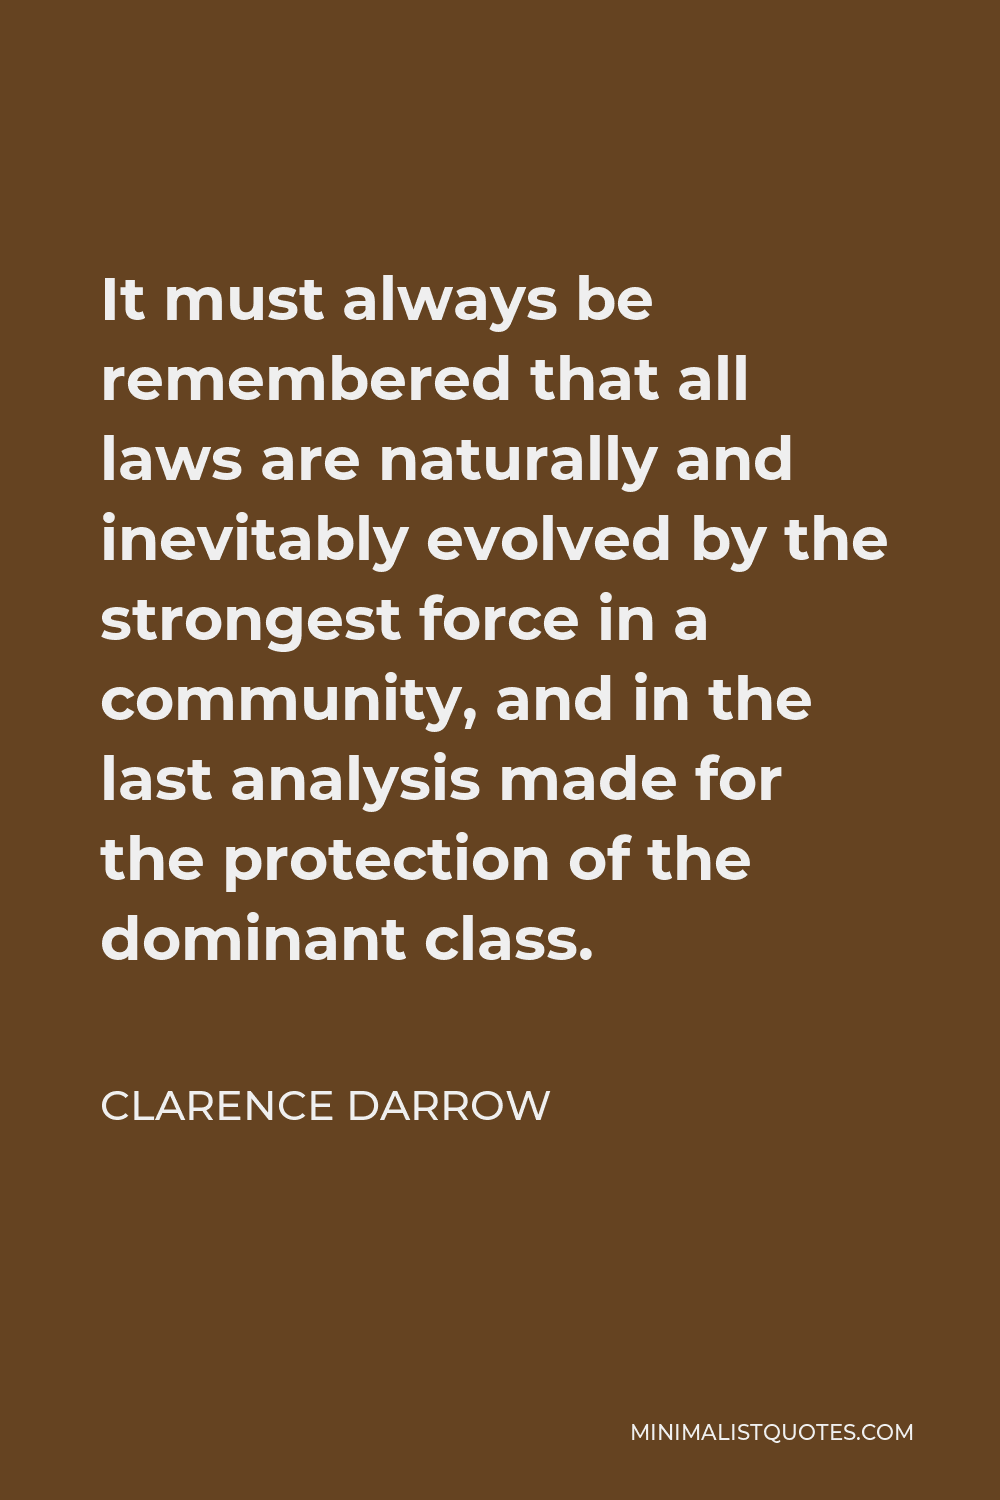 Clarence Darrow Quote - It must always be remembered that all laws are naturally and inevitably evolved by the strongest force in a community, and in the last analysis made for the protection of the dominant class.